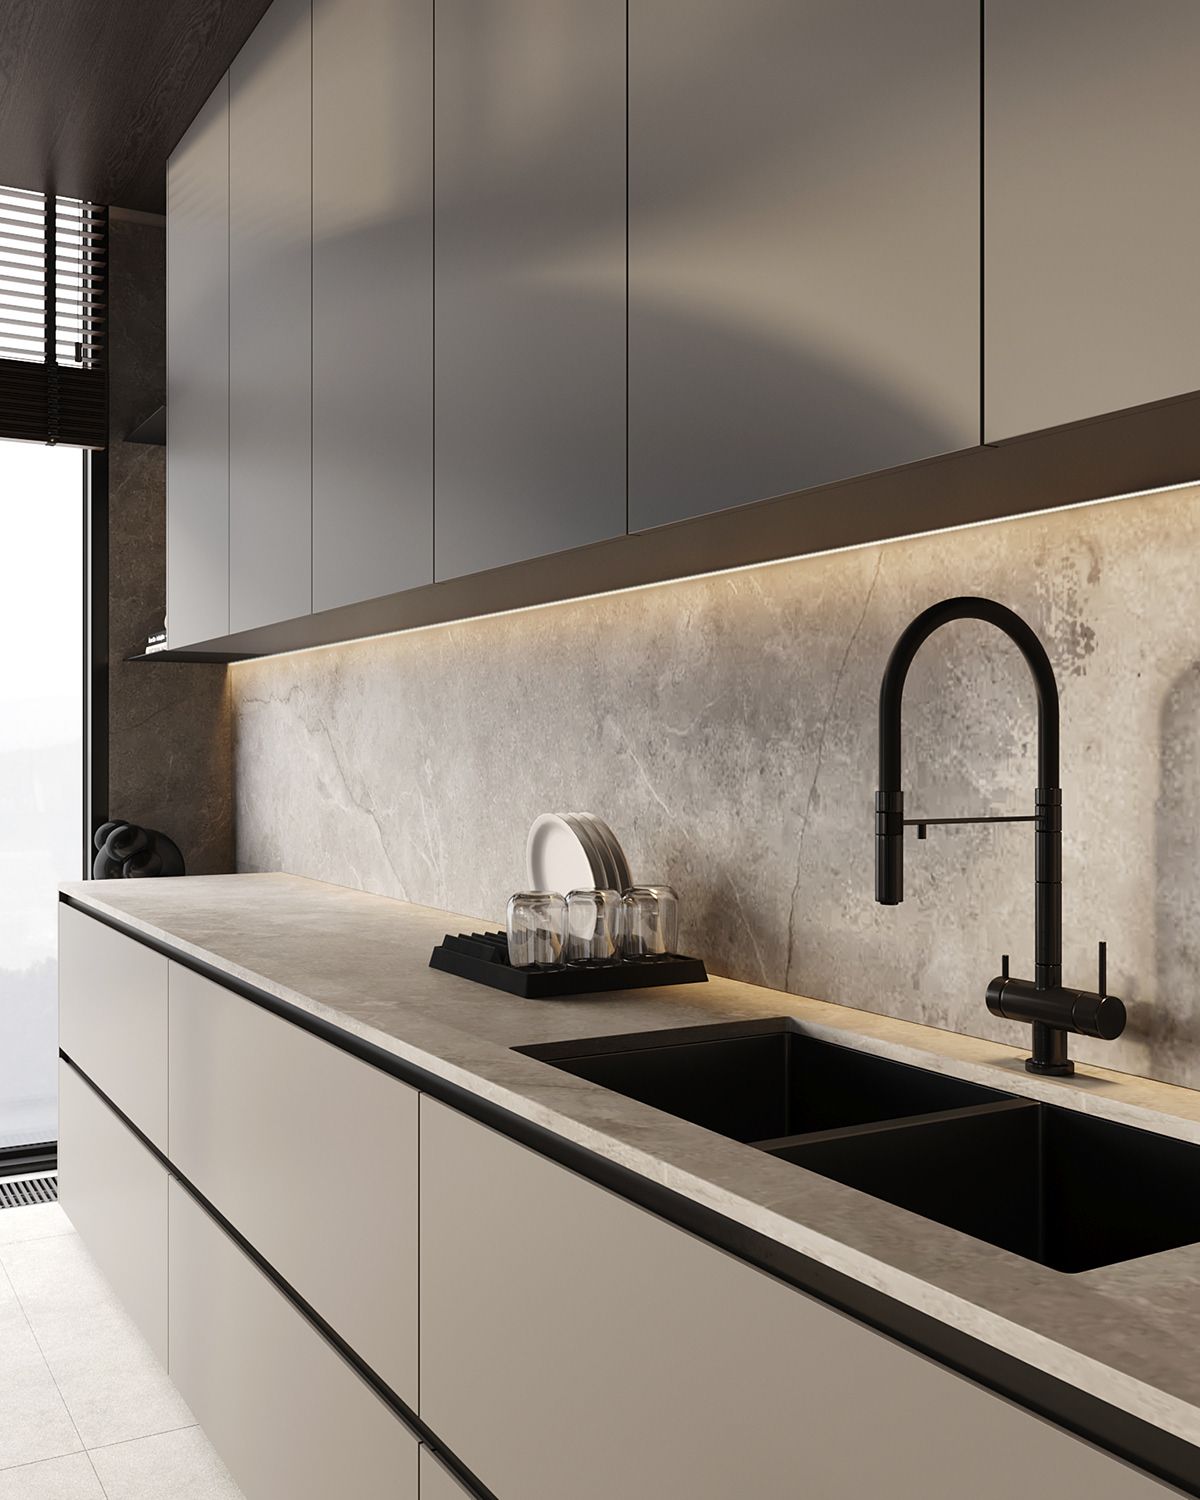 The basic elements of contemporary  kitchen design